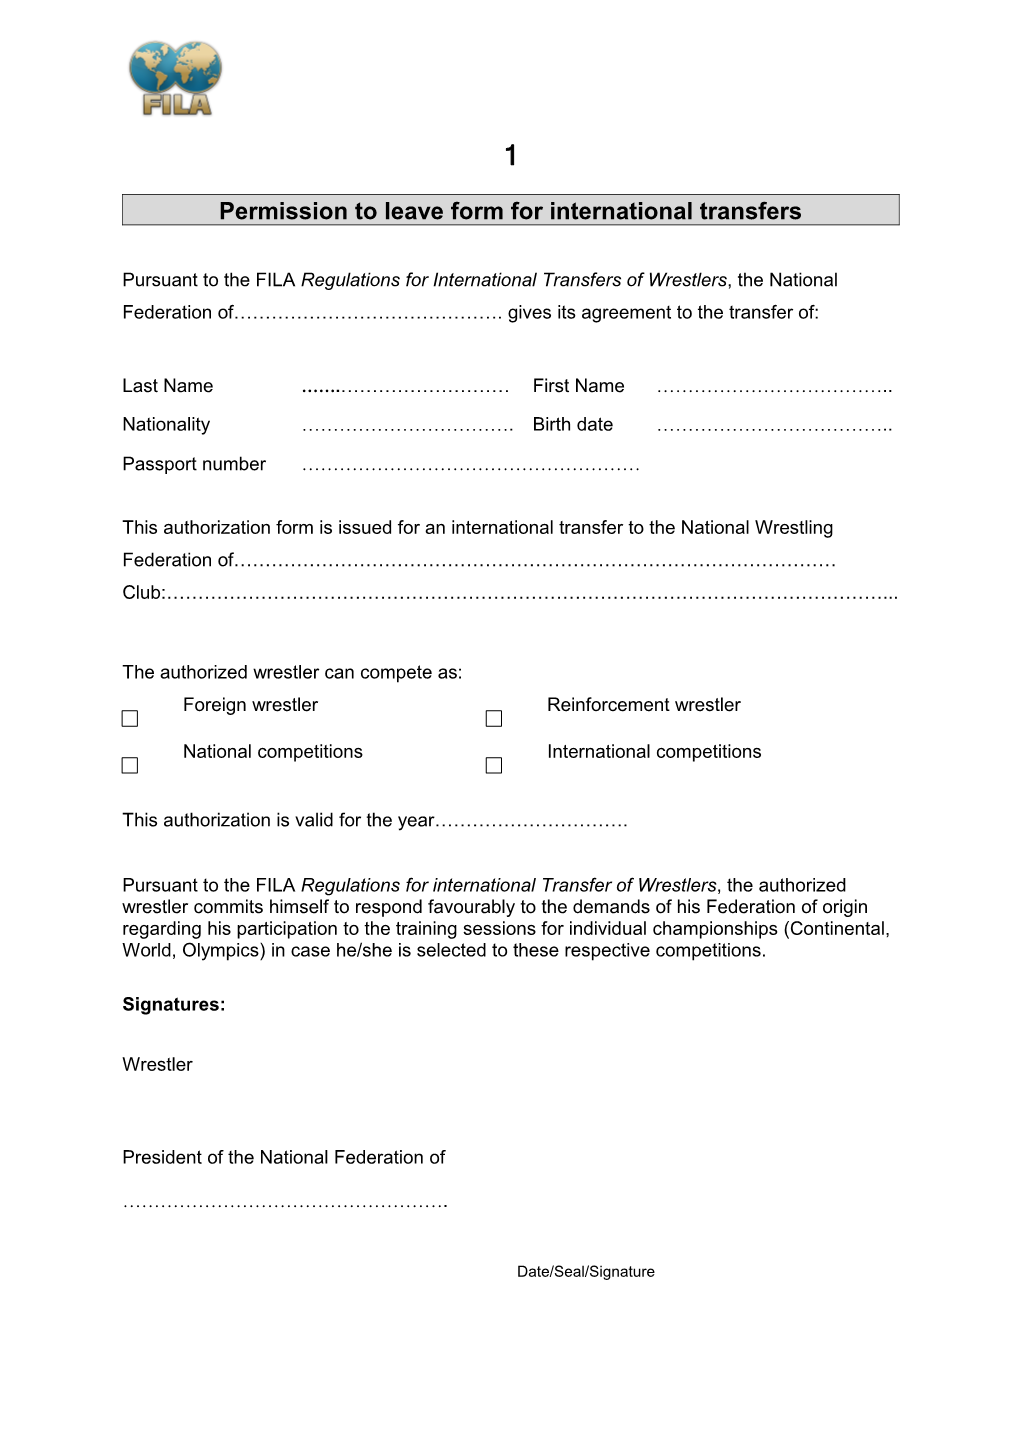 Permission to Leave Form for International Transfers